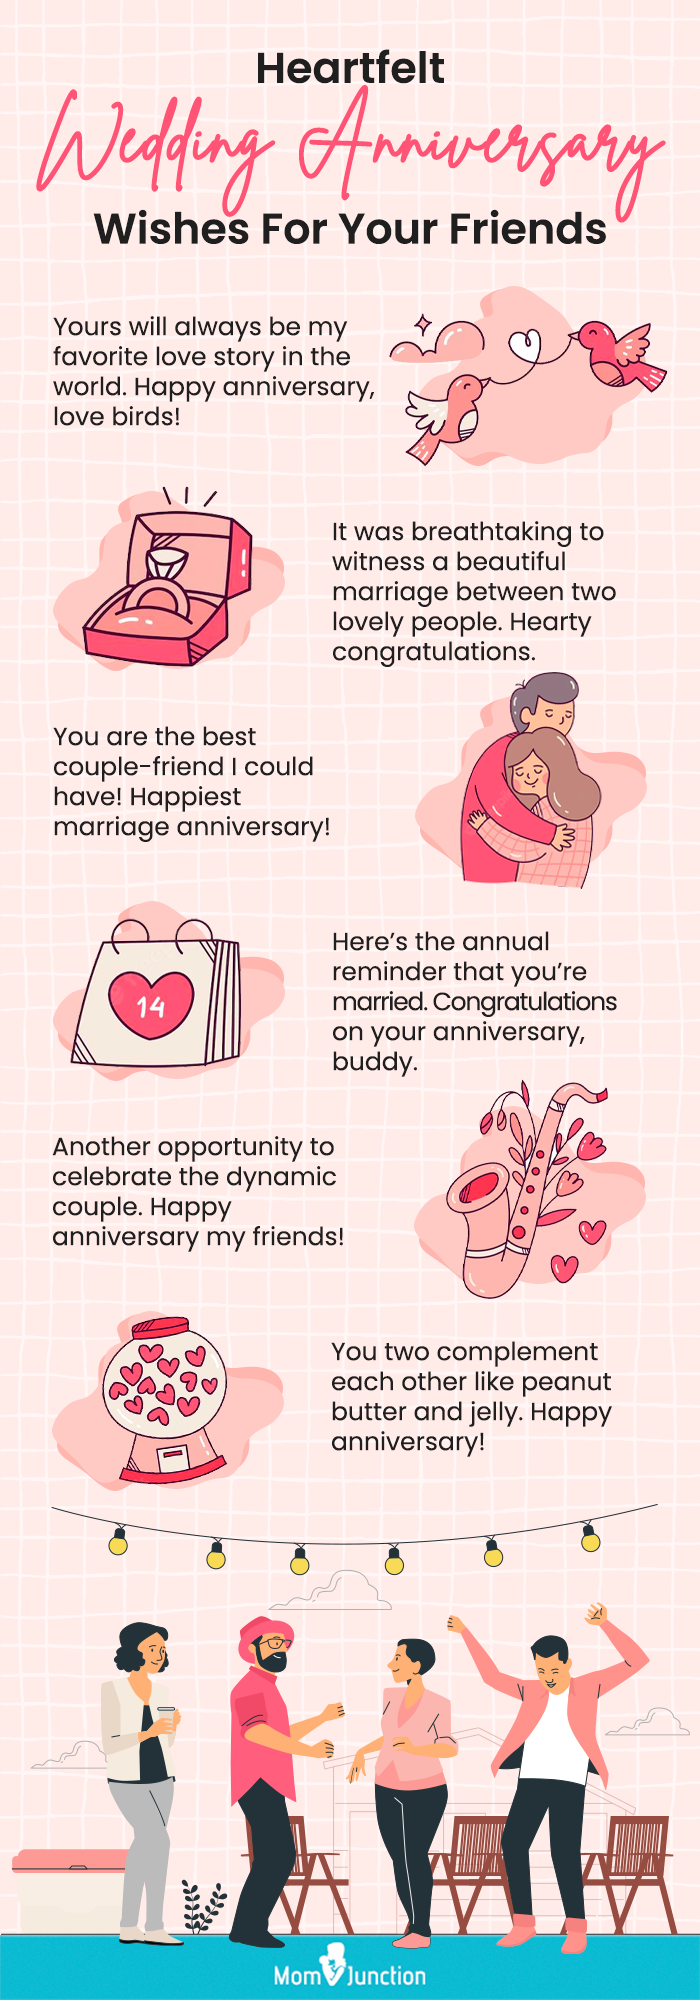 heartfelt wedding anniversary wishes for your friends (infographic)